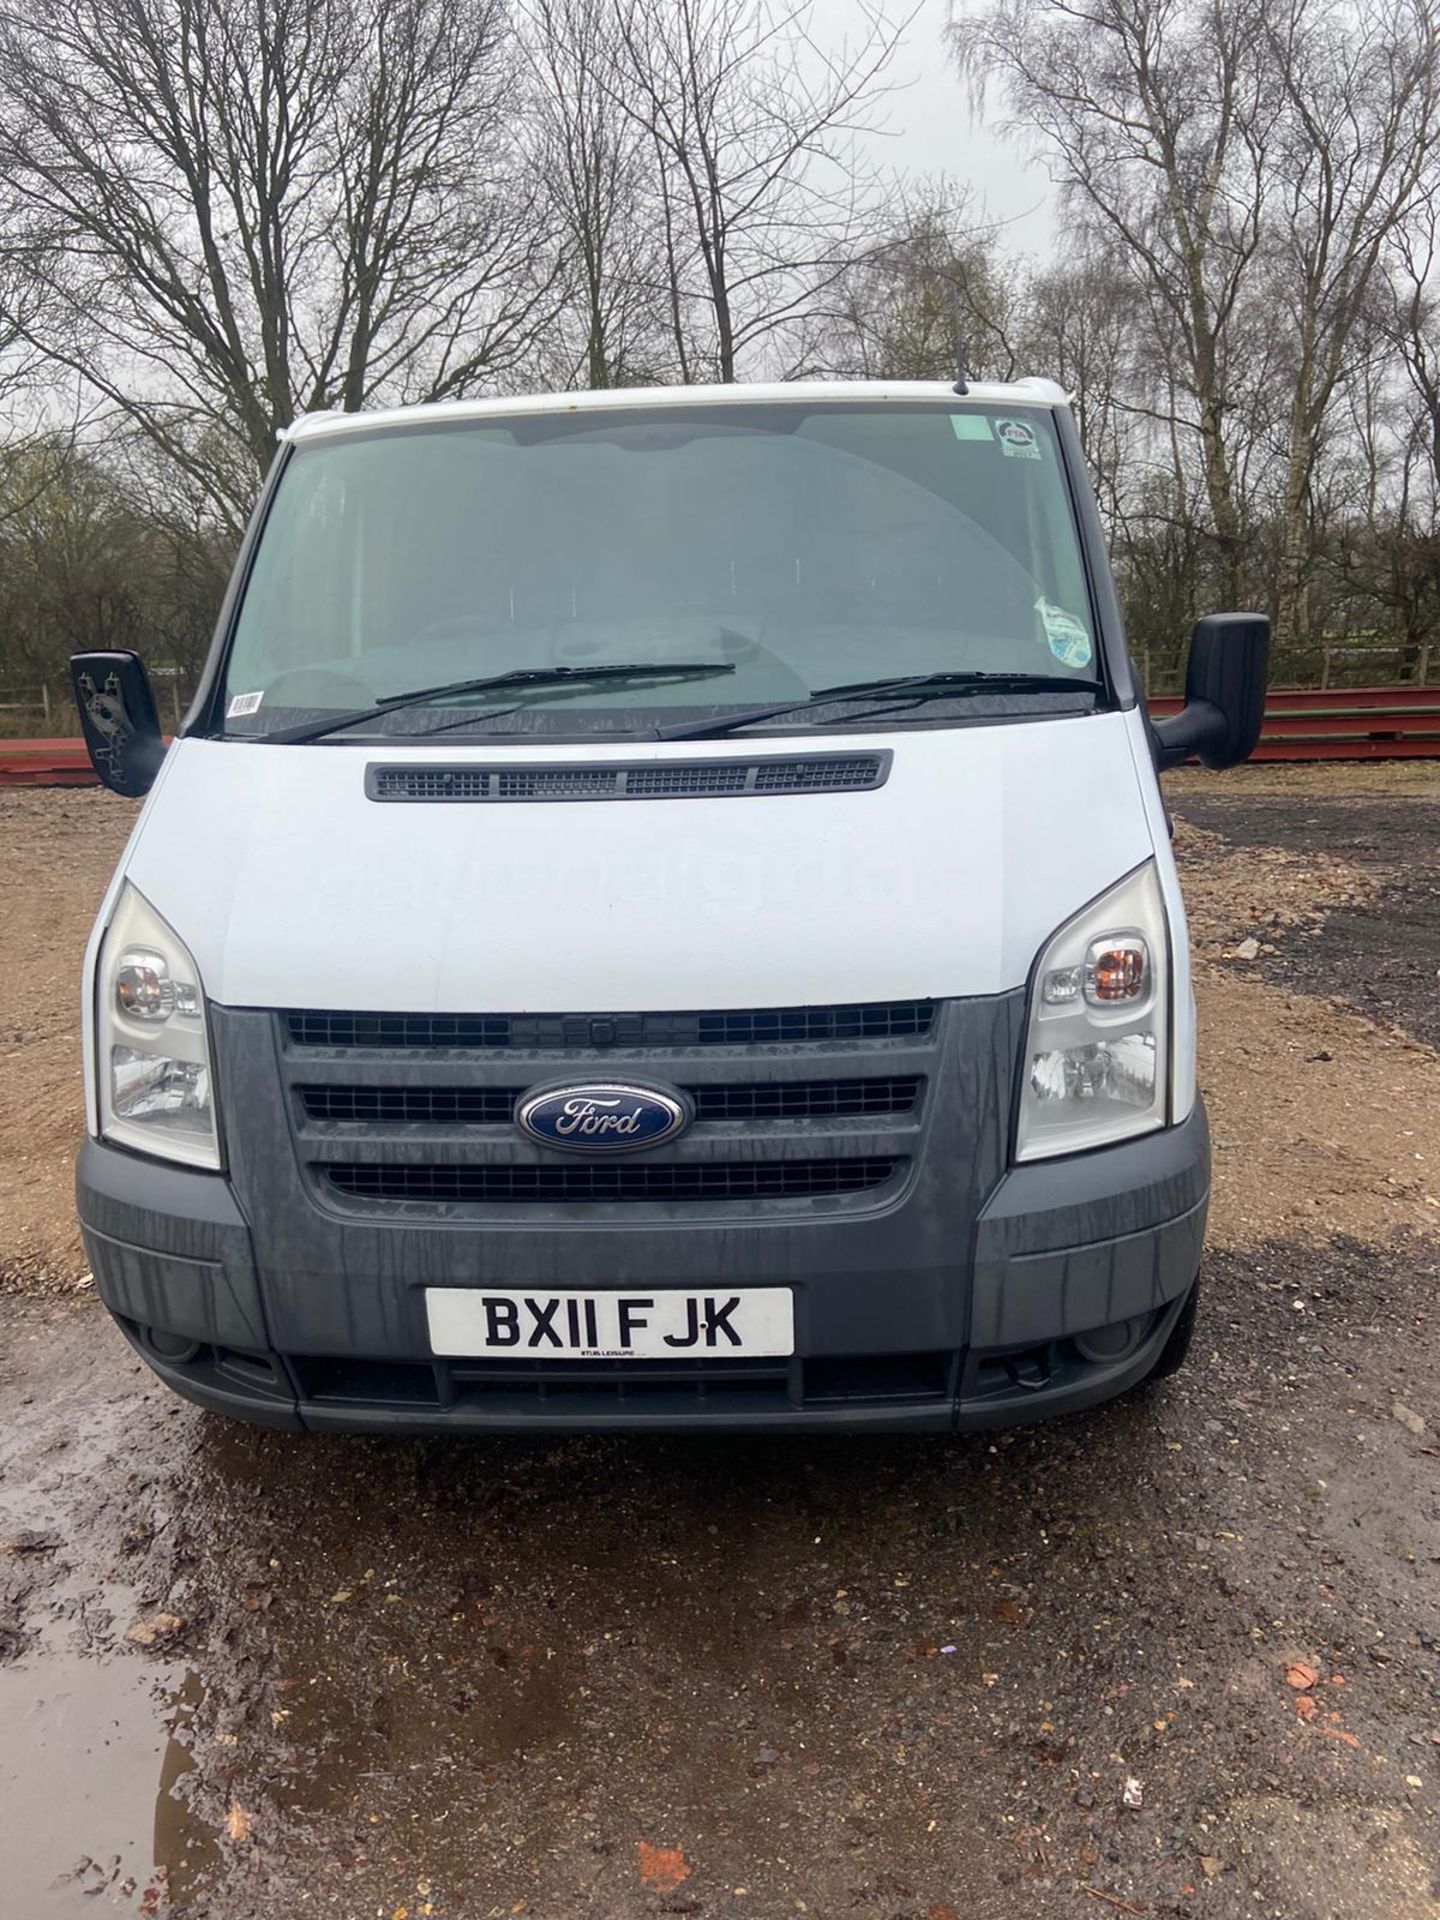 2011/11 REG FORD TRANSIT 115 T280S ECON FW 2.2 DIESEL WHITE PANEL VAN, SHOWING 0 FORMER KEEPERS - Image 2 of 11